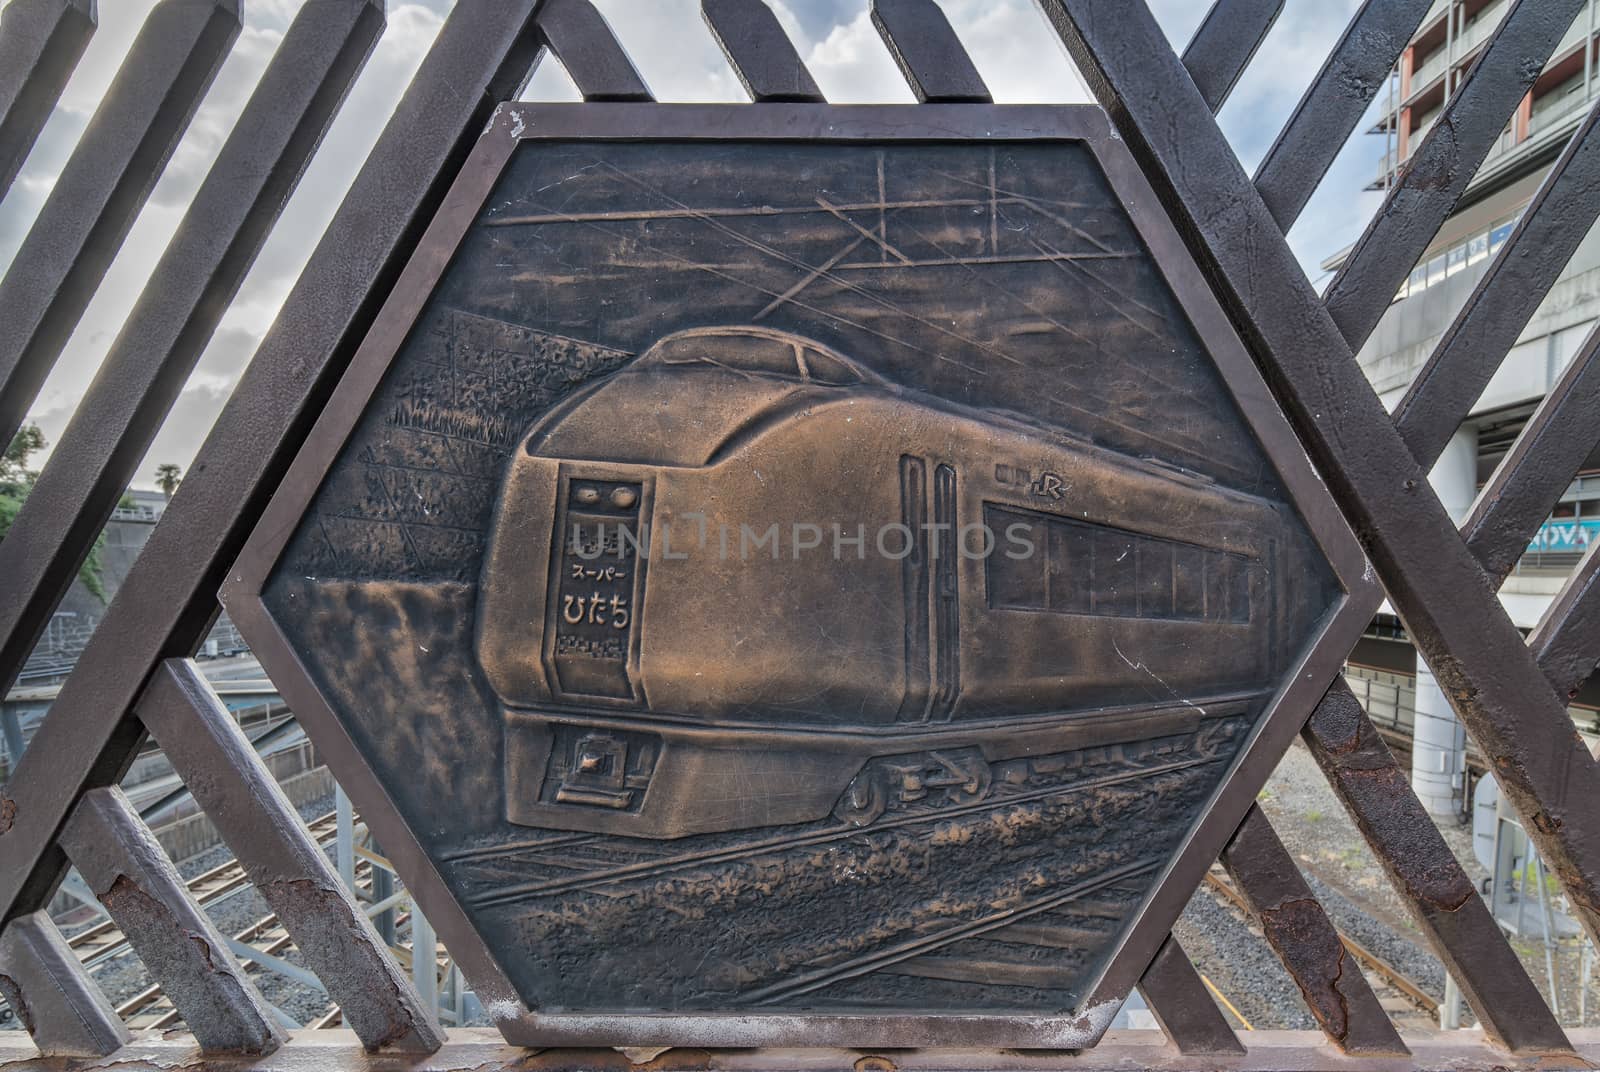 Engraving on metal representing the Super Hitachi train on the Shimogoindenbashi Bridge that reaches the Nippori and Yanaka neighborhoods in the Arakawa district at the north exit of the Nippori Station on the JR Yamanote Line in Tokyo. In the center of the bridge is a balcony called the Train Museum which allows to observe the 2500 trains that pass each day below. The bridge dating back to the 1930s has been renovated several times to adapt to the evolution of traffic and was completed in its current form in 1988.